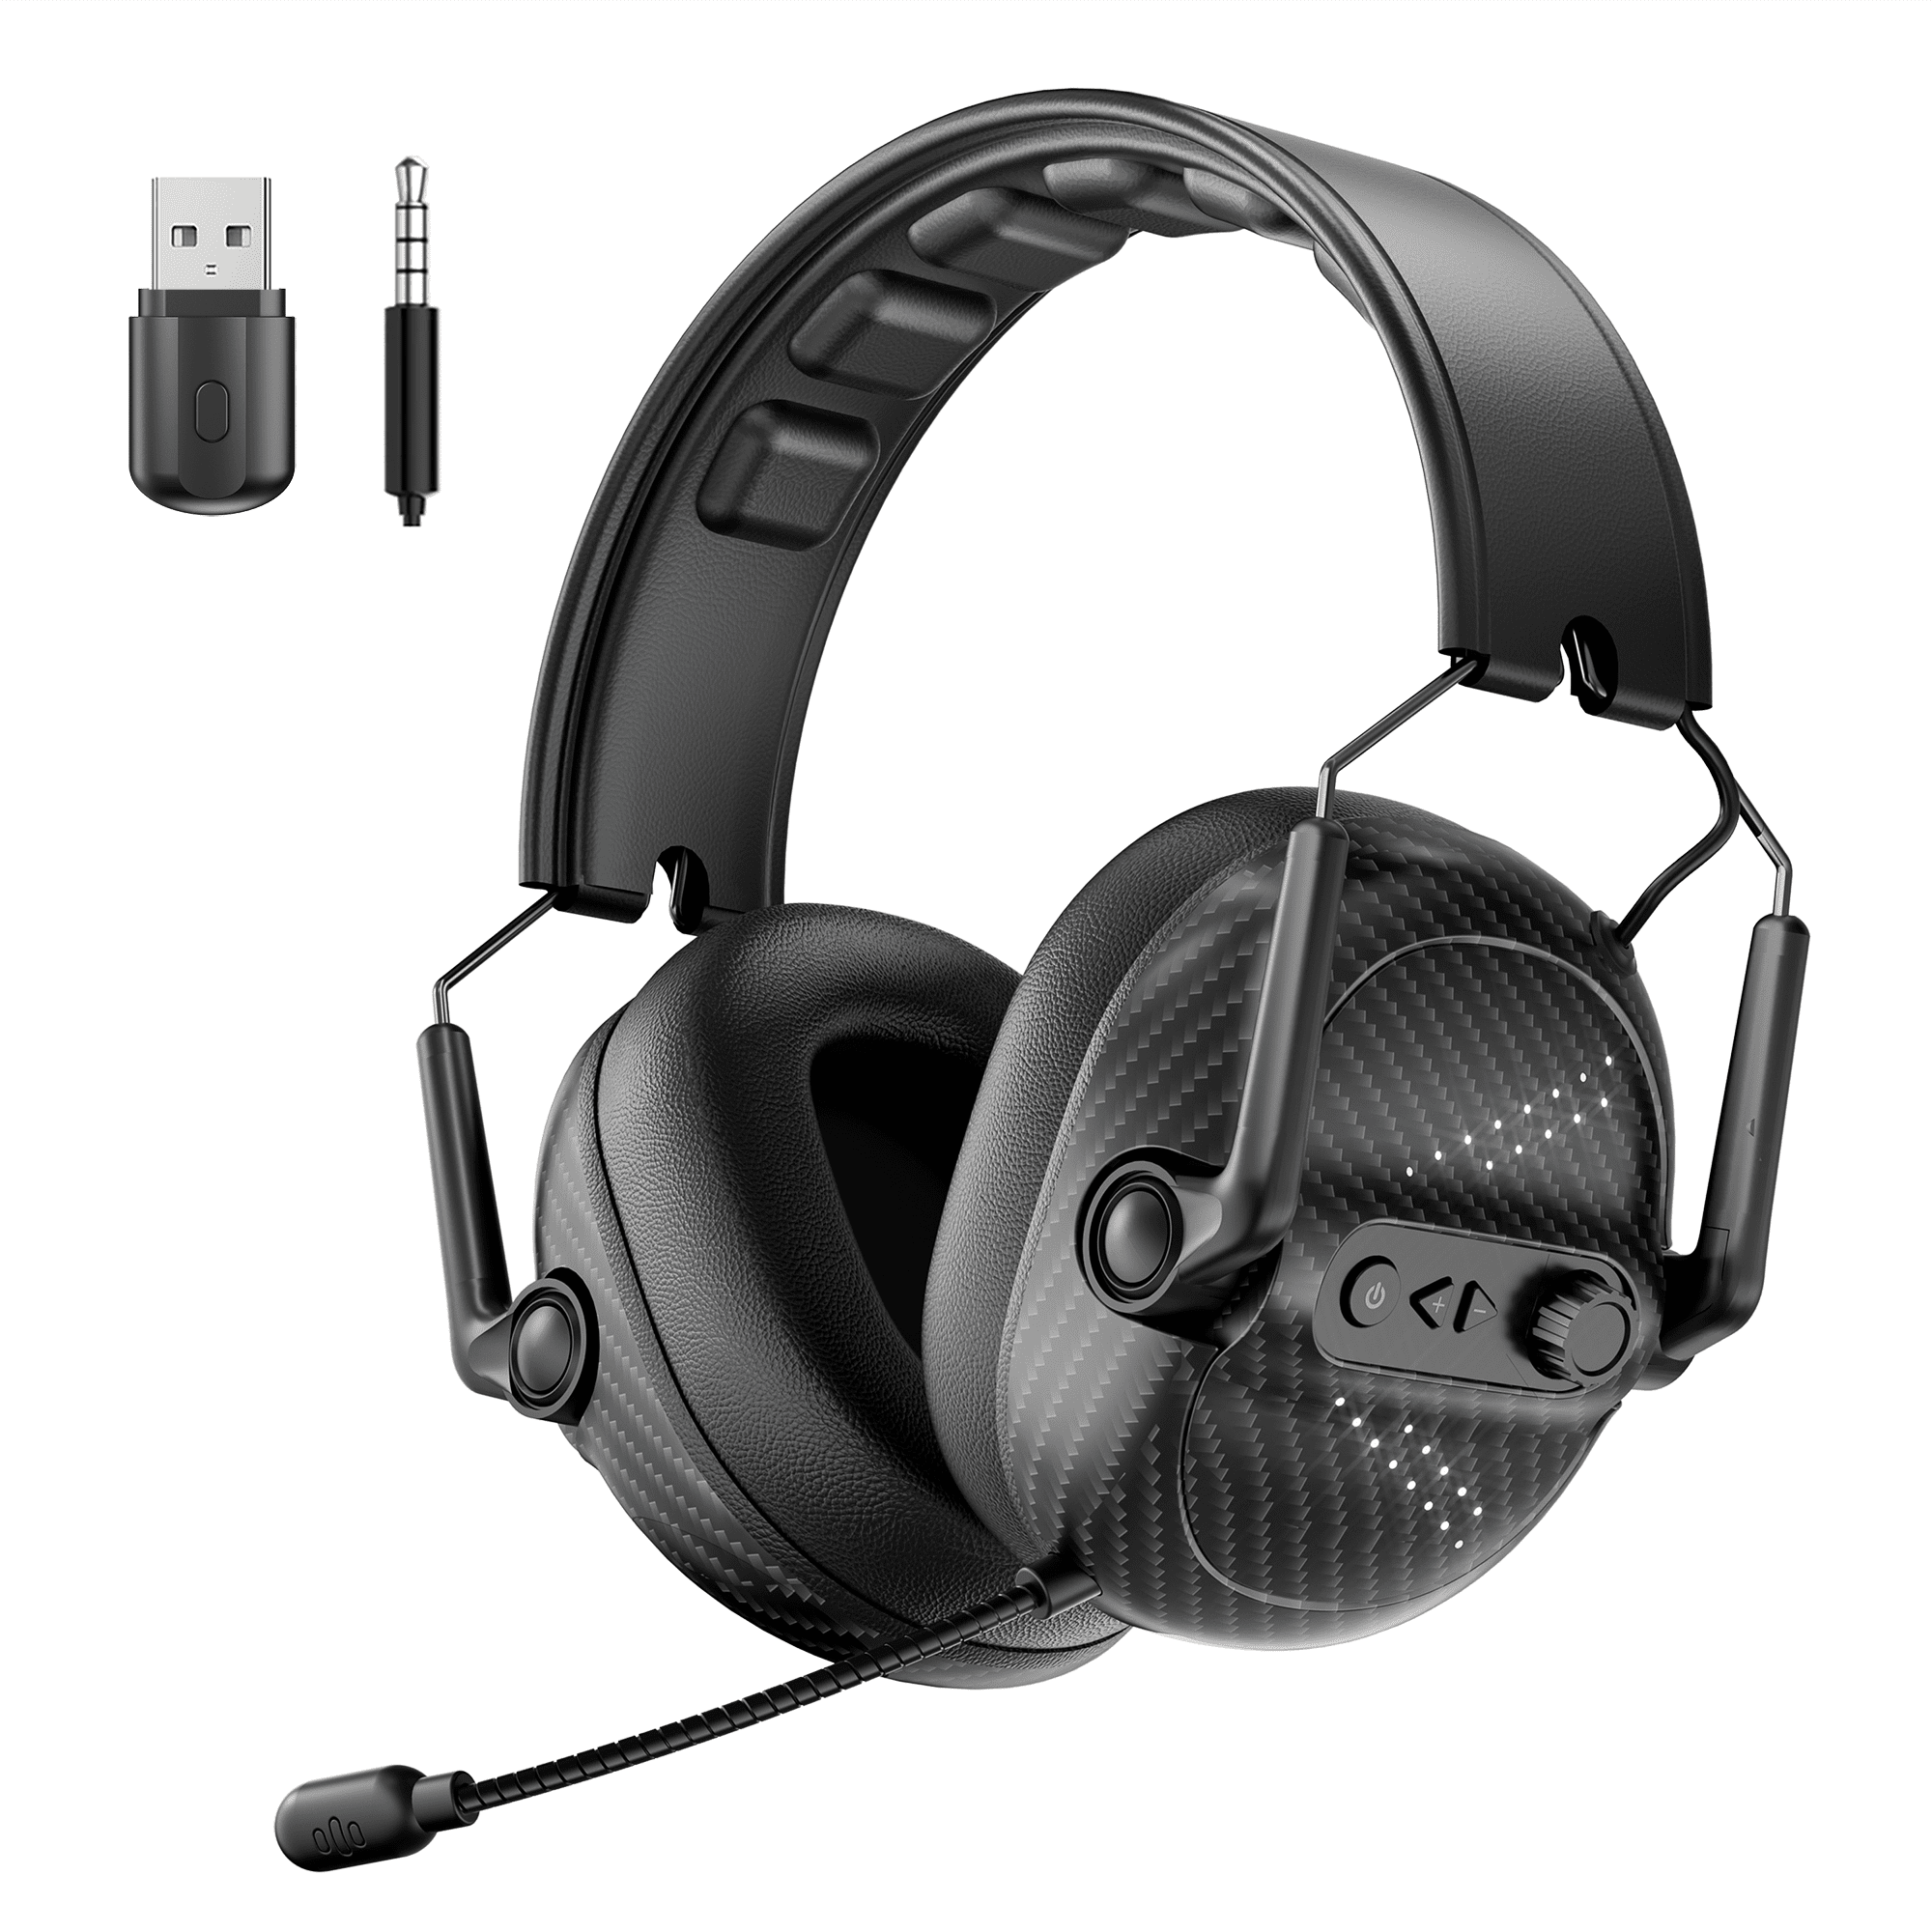 UHM Wireless Gaming Headset for PC/PS4/PS5/ Nintendo Switch,Foldable Over Ear 2.4G/Bluetooth Gaming Headphones with Detachable Noise-Canceling Mic 7.1 Surround Sound ,3.5mm Wired Mode for Xbox Series